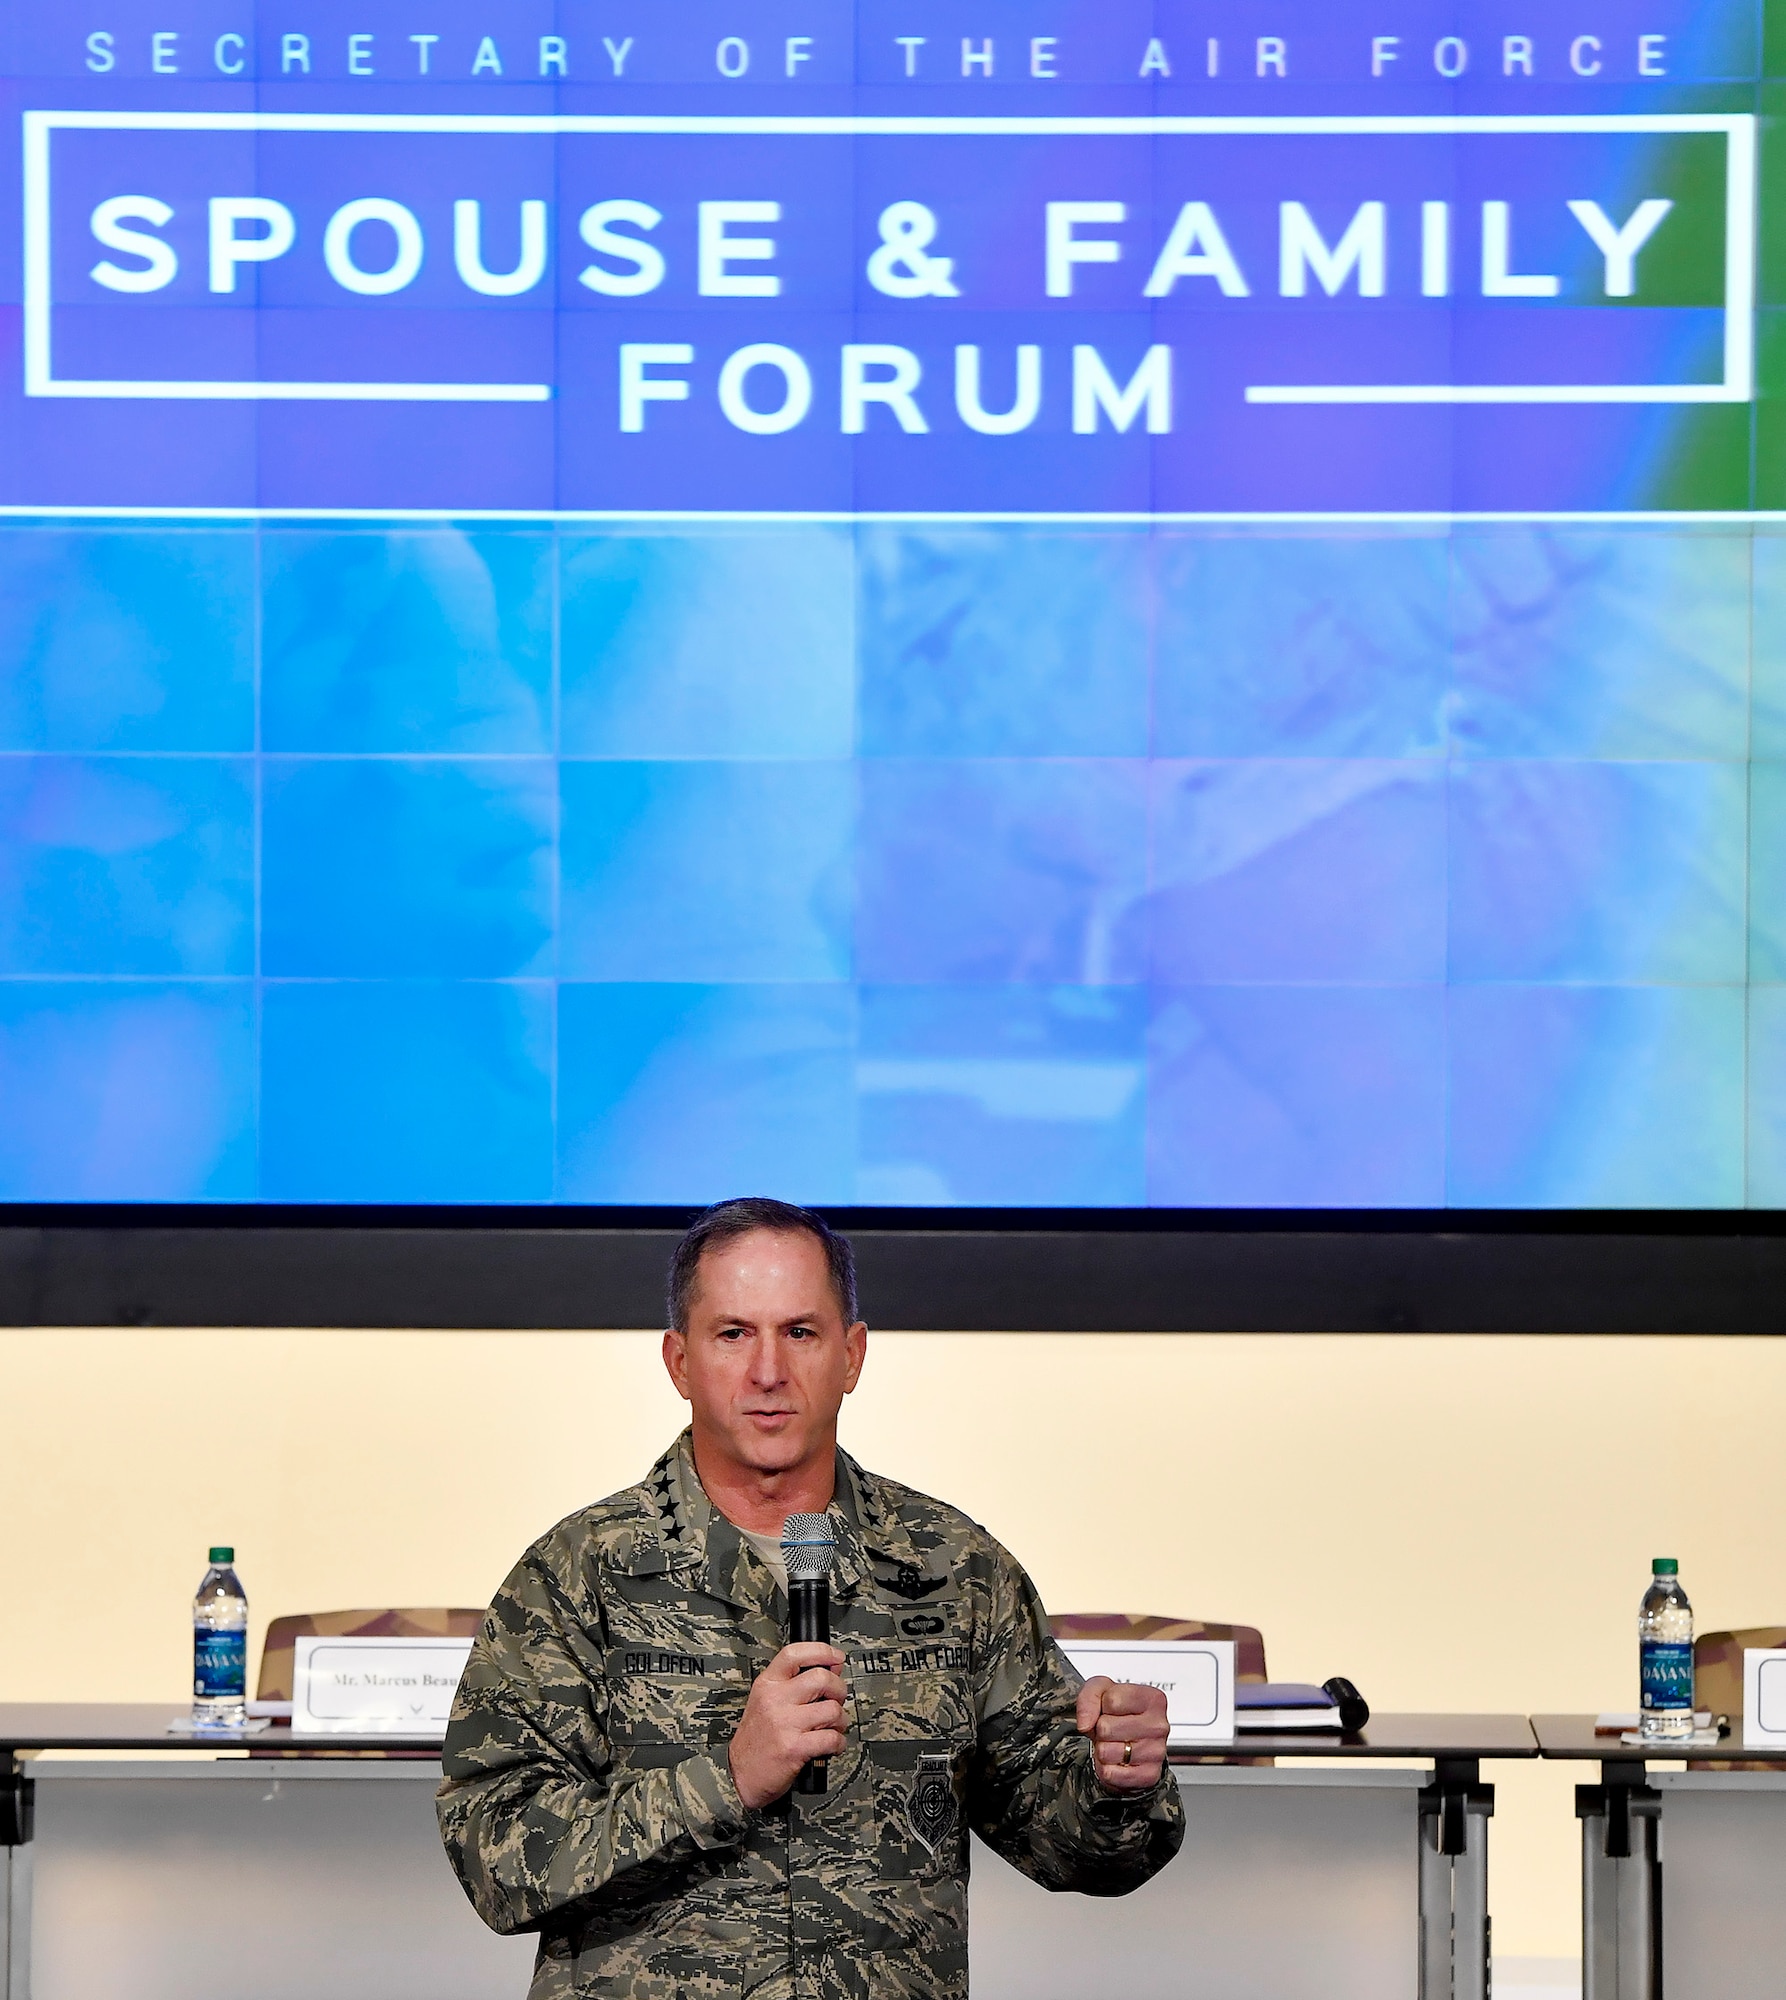 Air Force Chief of Staff Gen. David L. Goldfein speaks to attendees of the Secretary of the Air Force Spouse and Family Forum at Joint Base Andrews, Md., Oct. 19, 2016. (U.S. Air Force photo/Scott M. Ash)